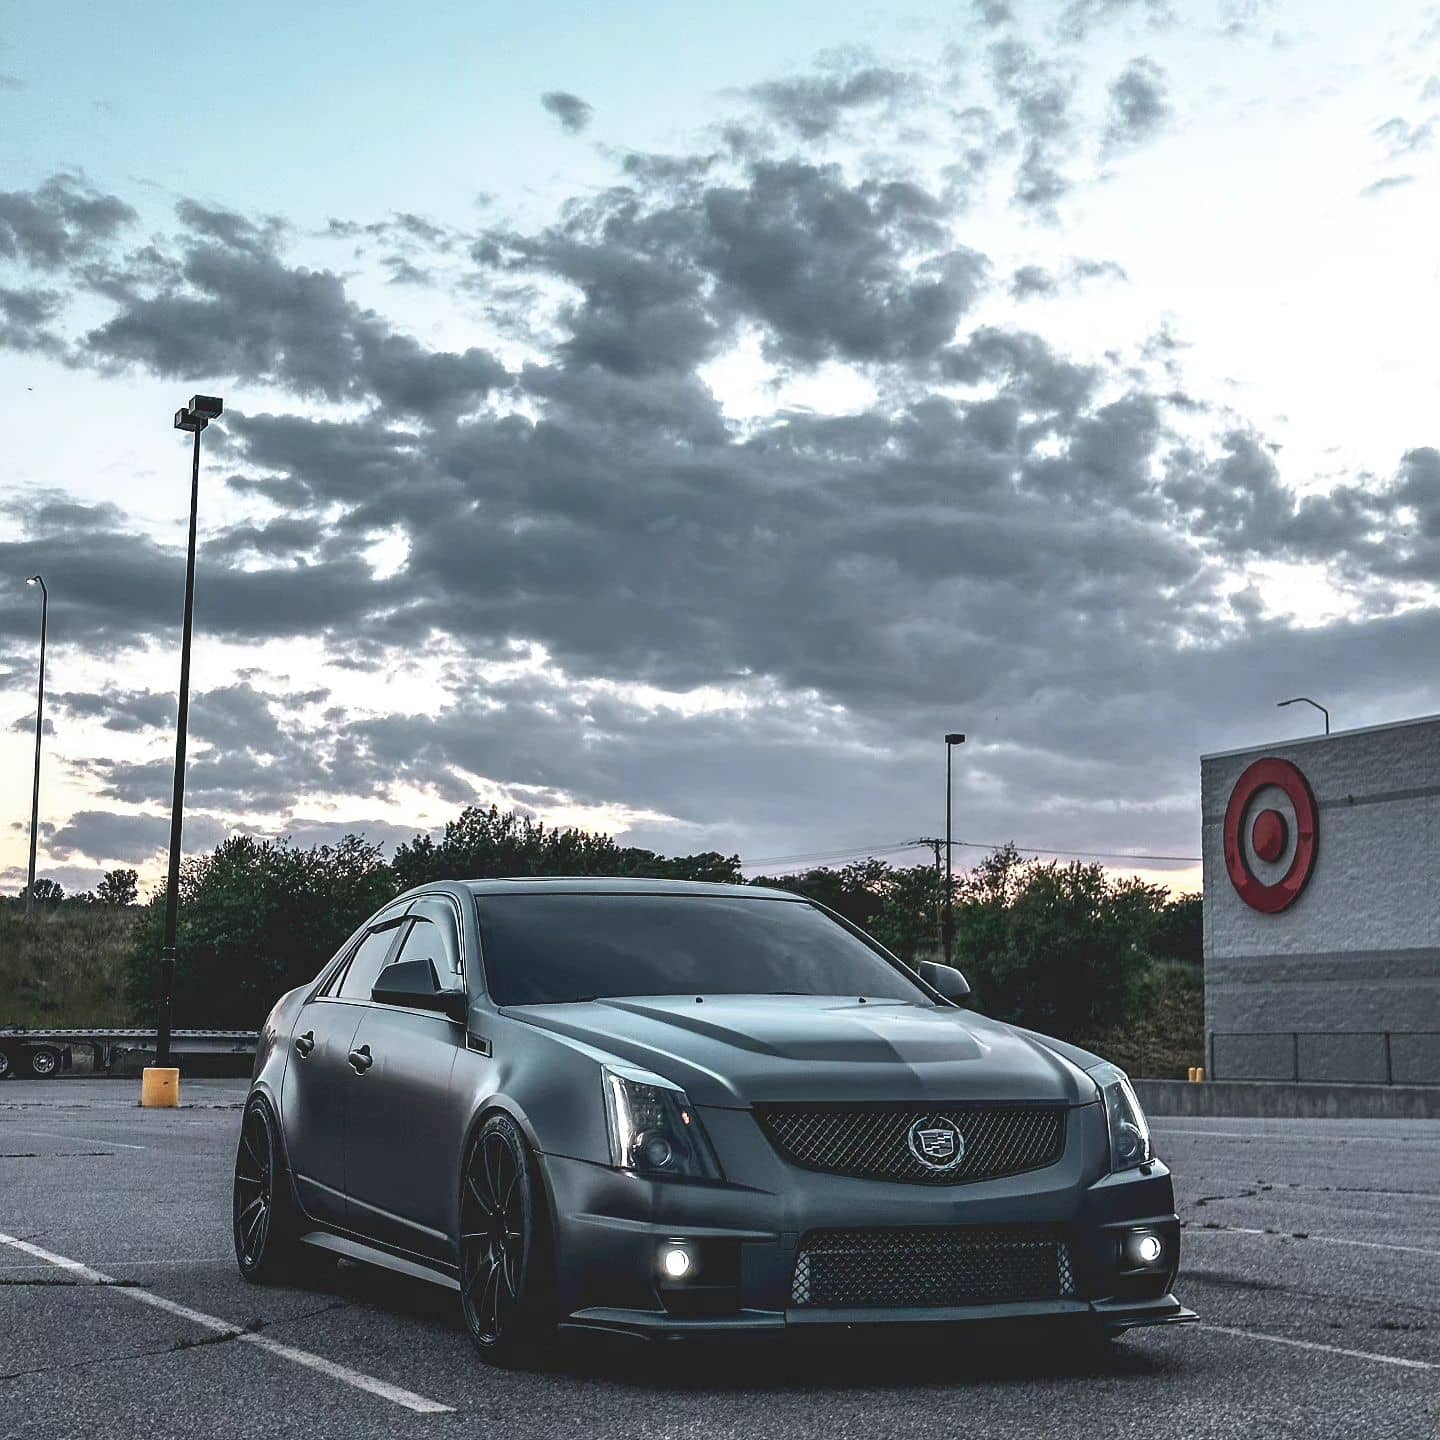 Gen 2 Cadillac CTS-V on 20×9 and 20×10 Niche Essen wheels wrapped in 255/35 and 295/30 Kumho PS91 tires